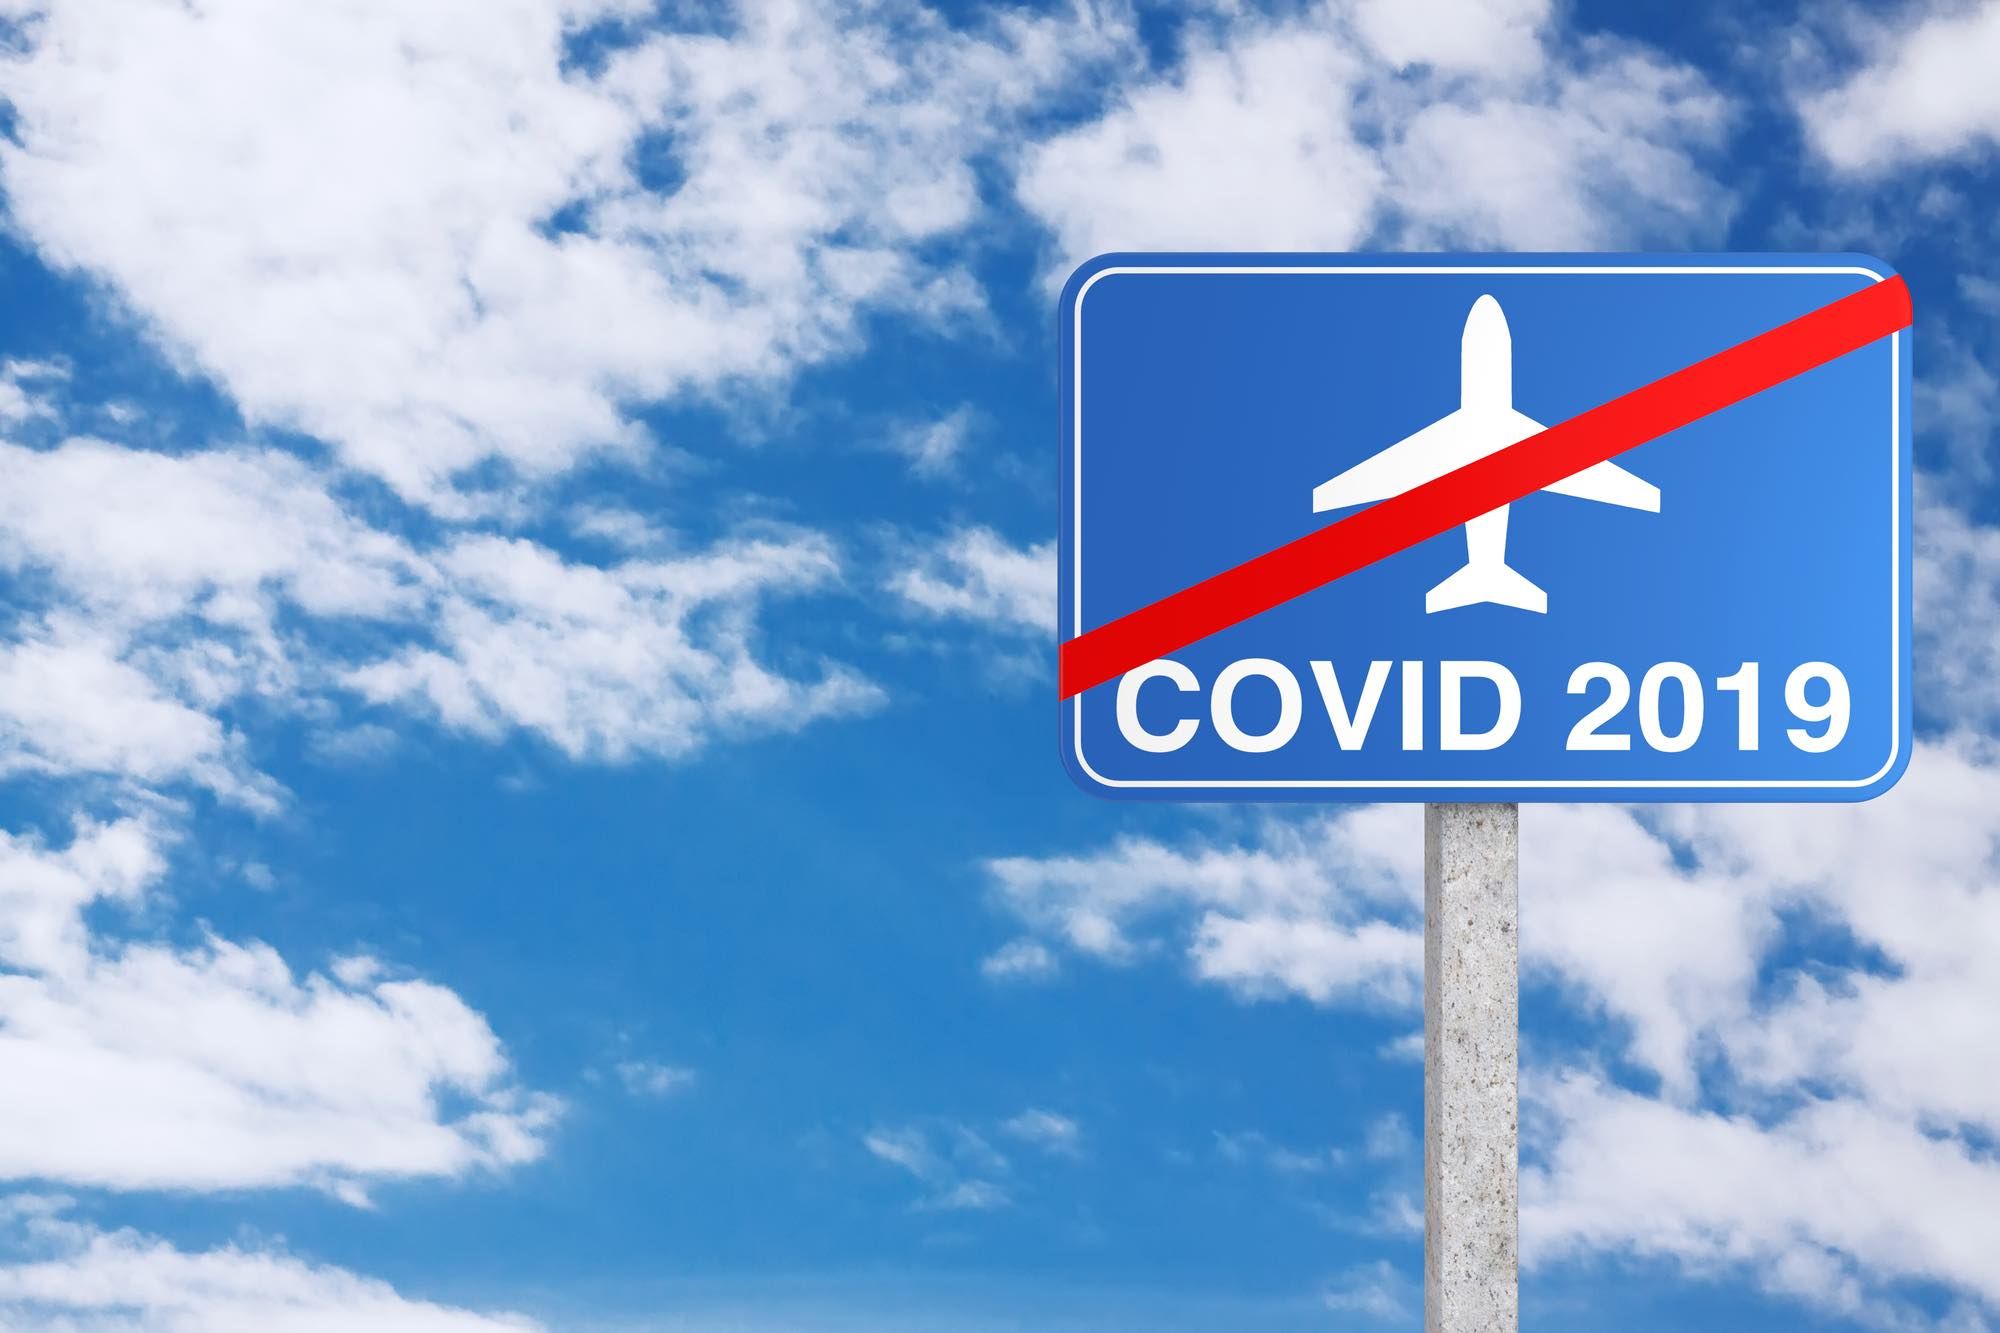 Flight cancelled due to covid-19